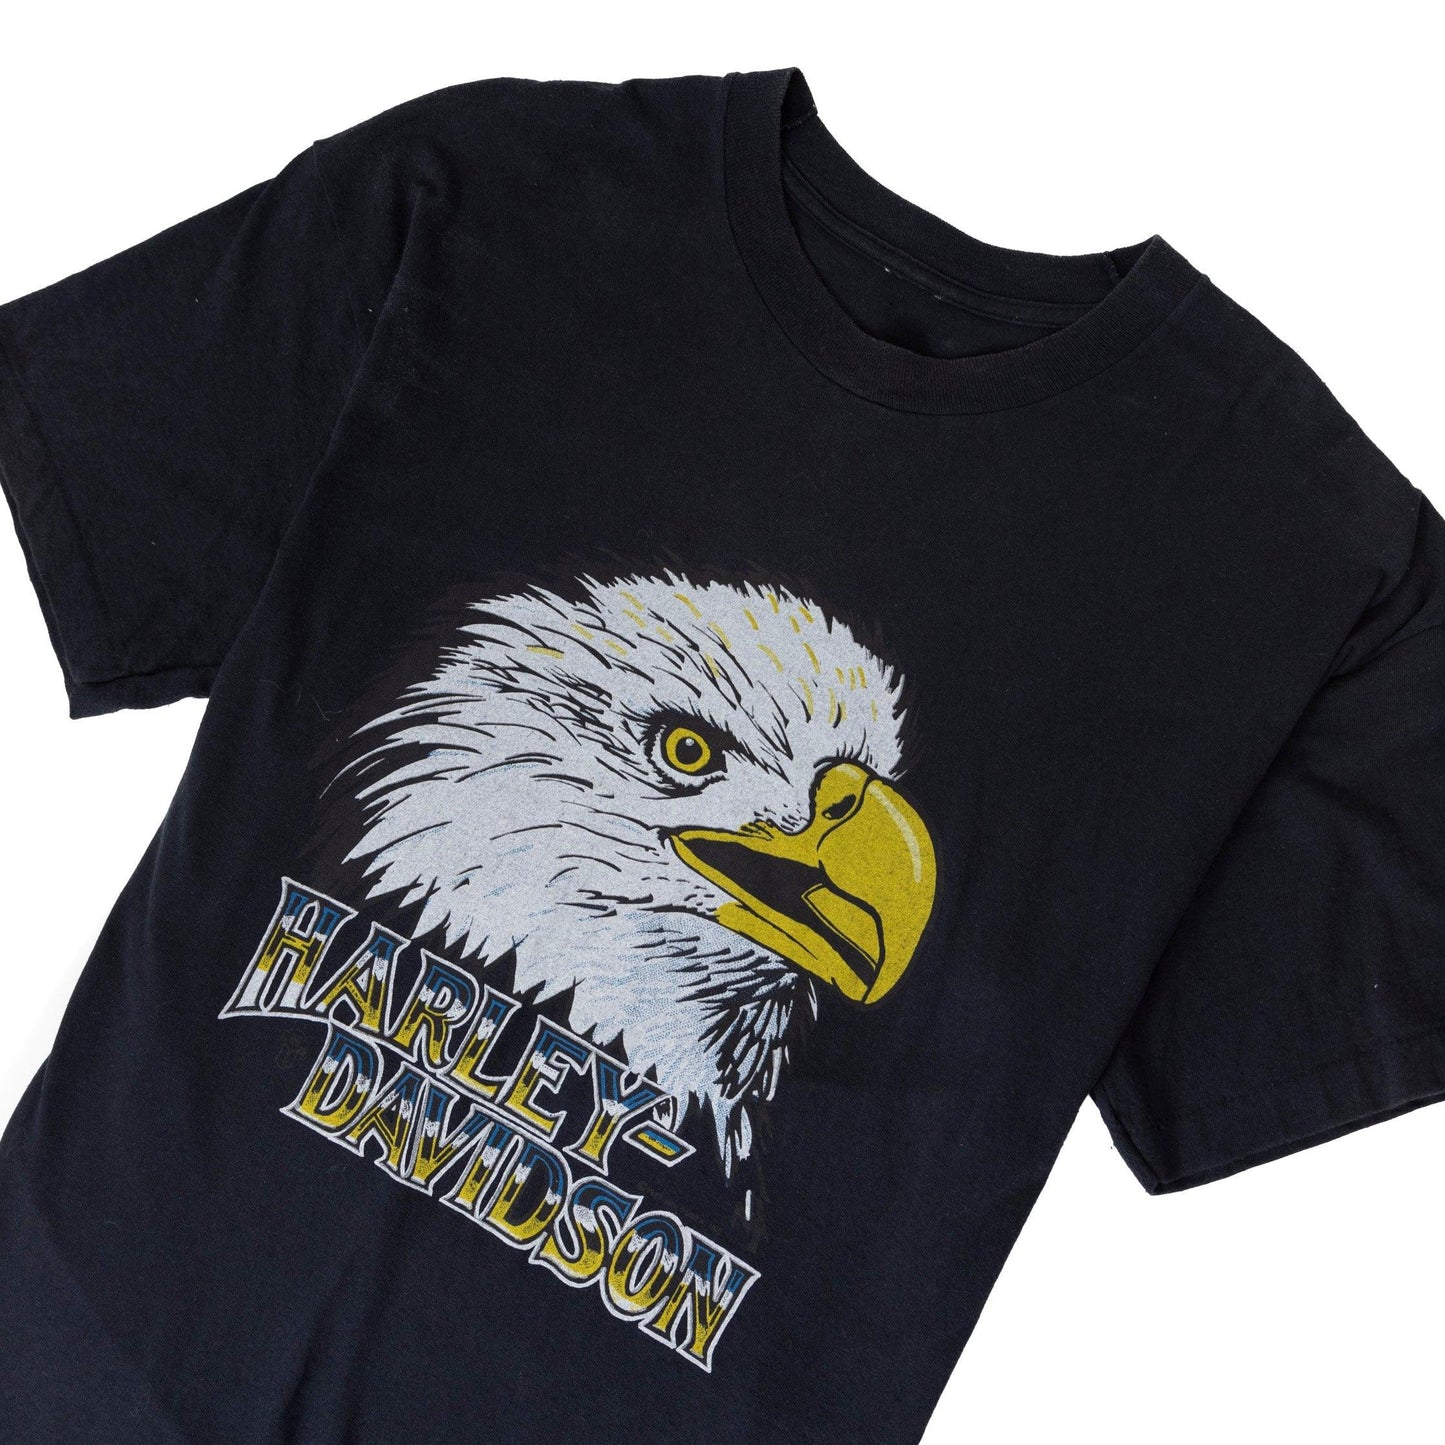 90s Harley Davidson Eagle SS Tee - Known Source